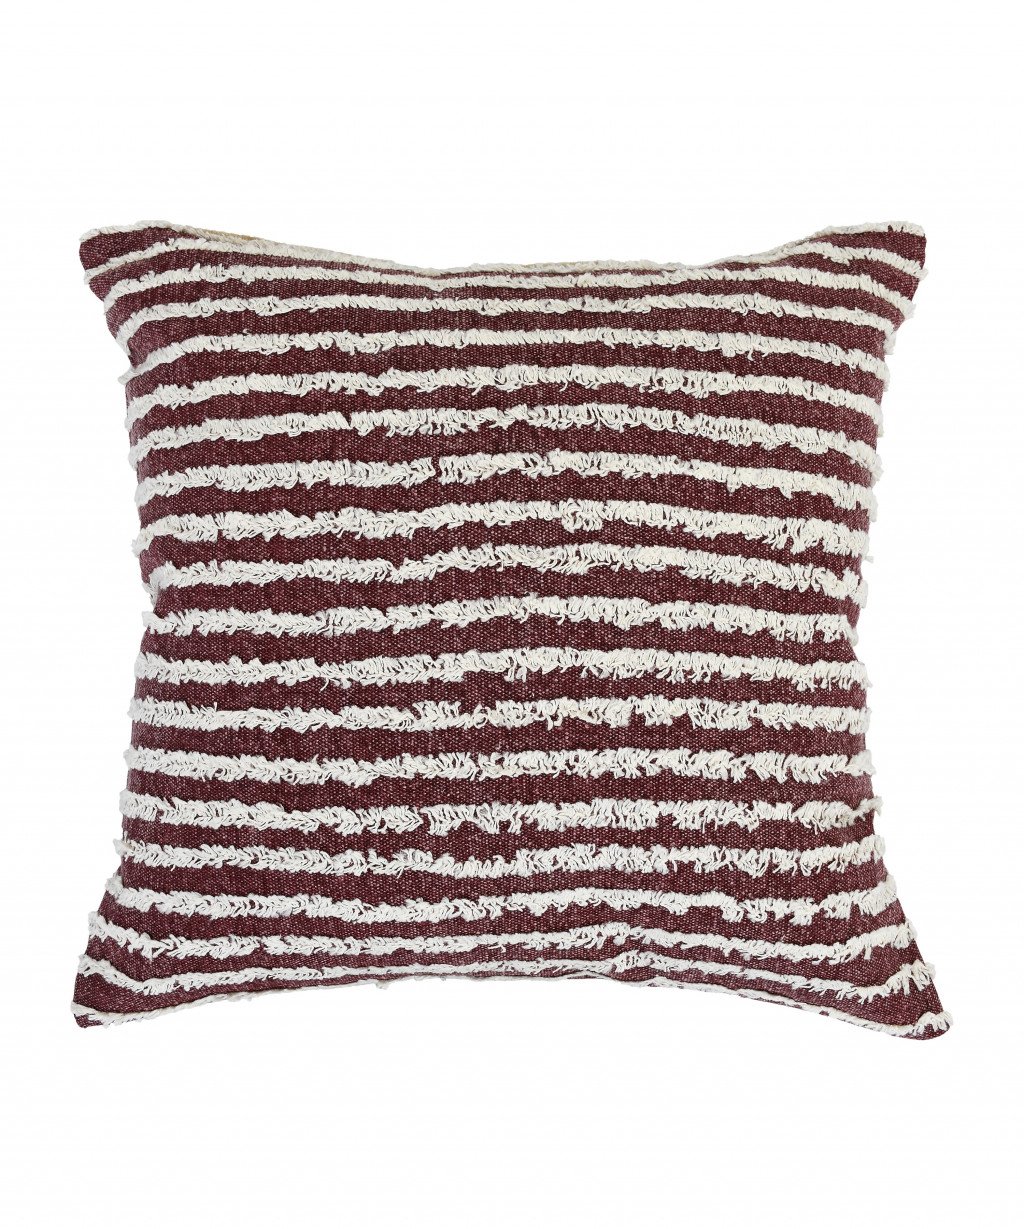 20" X 20" Maroon And Cream 100% Cotton Striped Zippered Pillow-517227-1